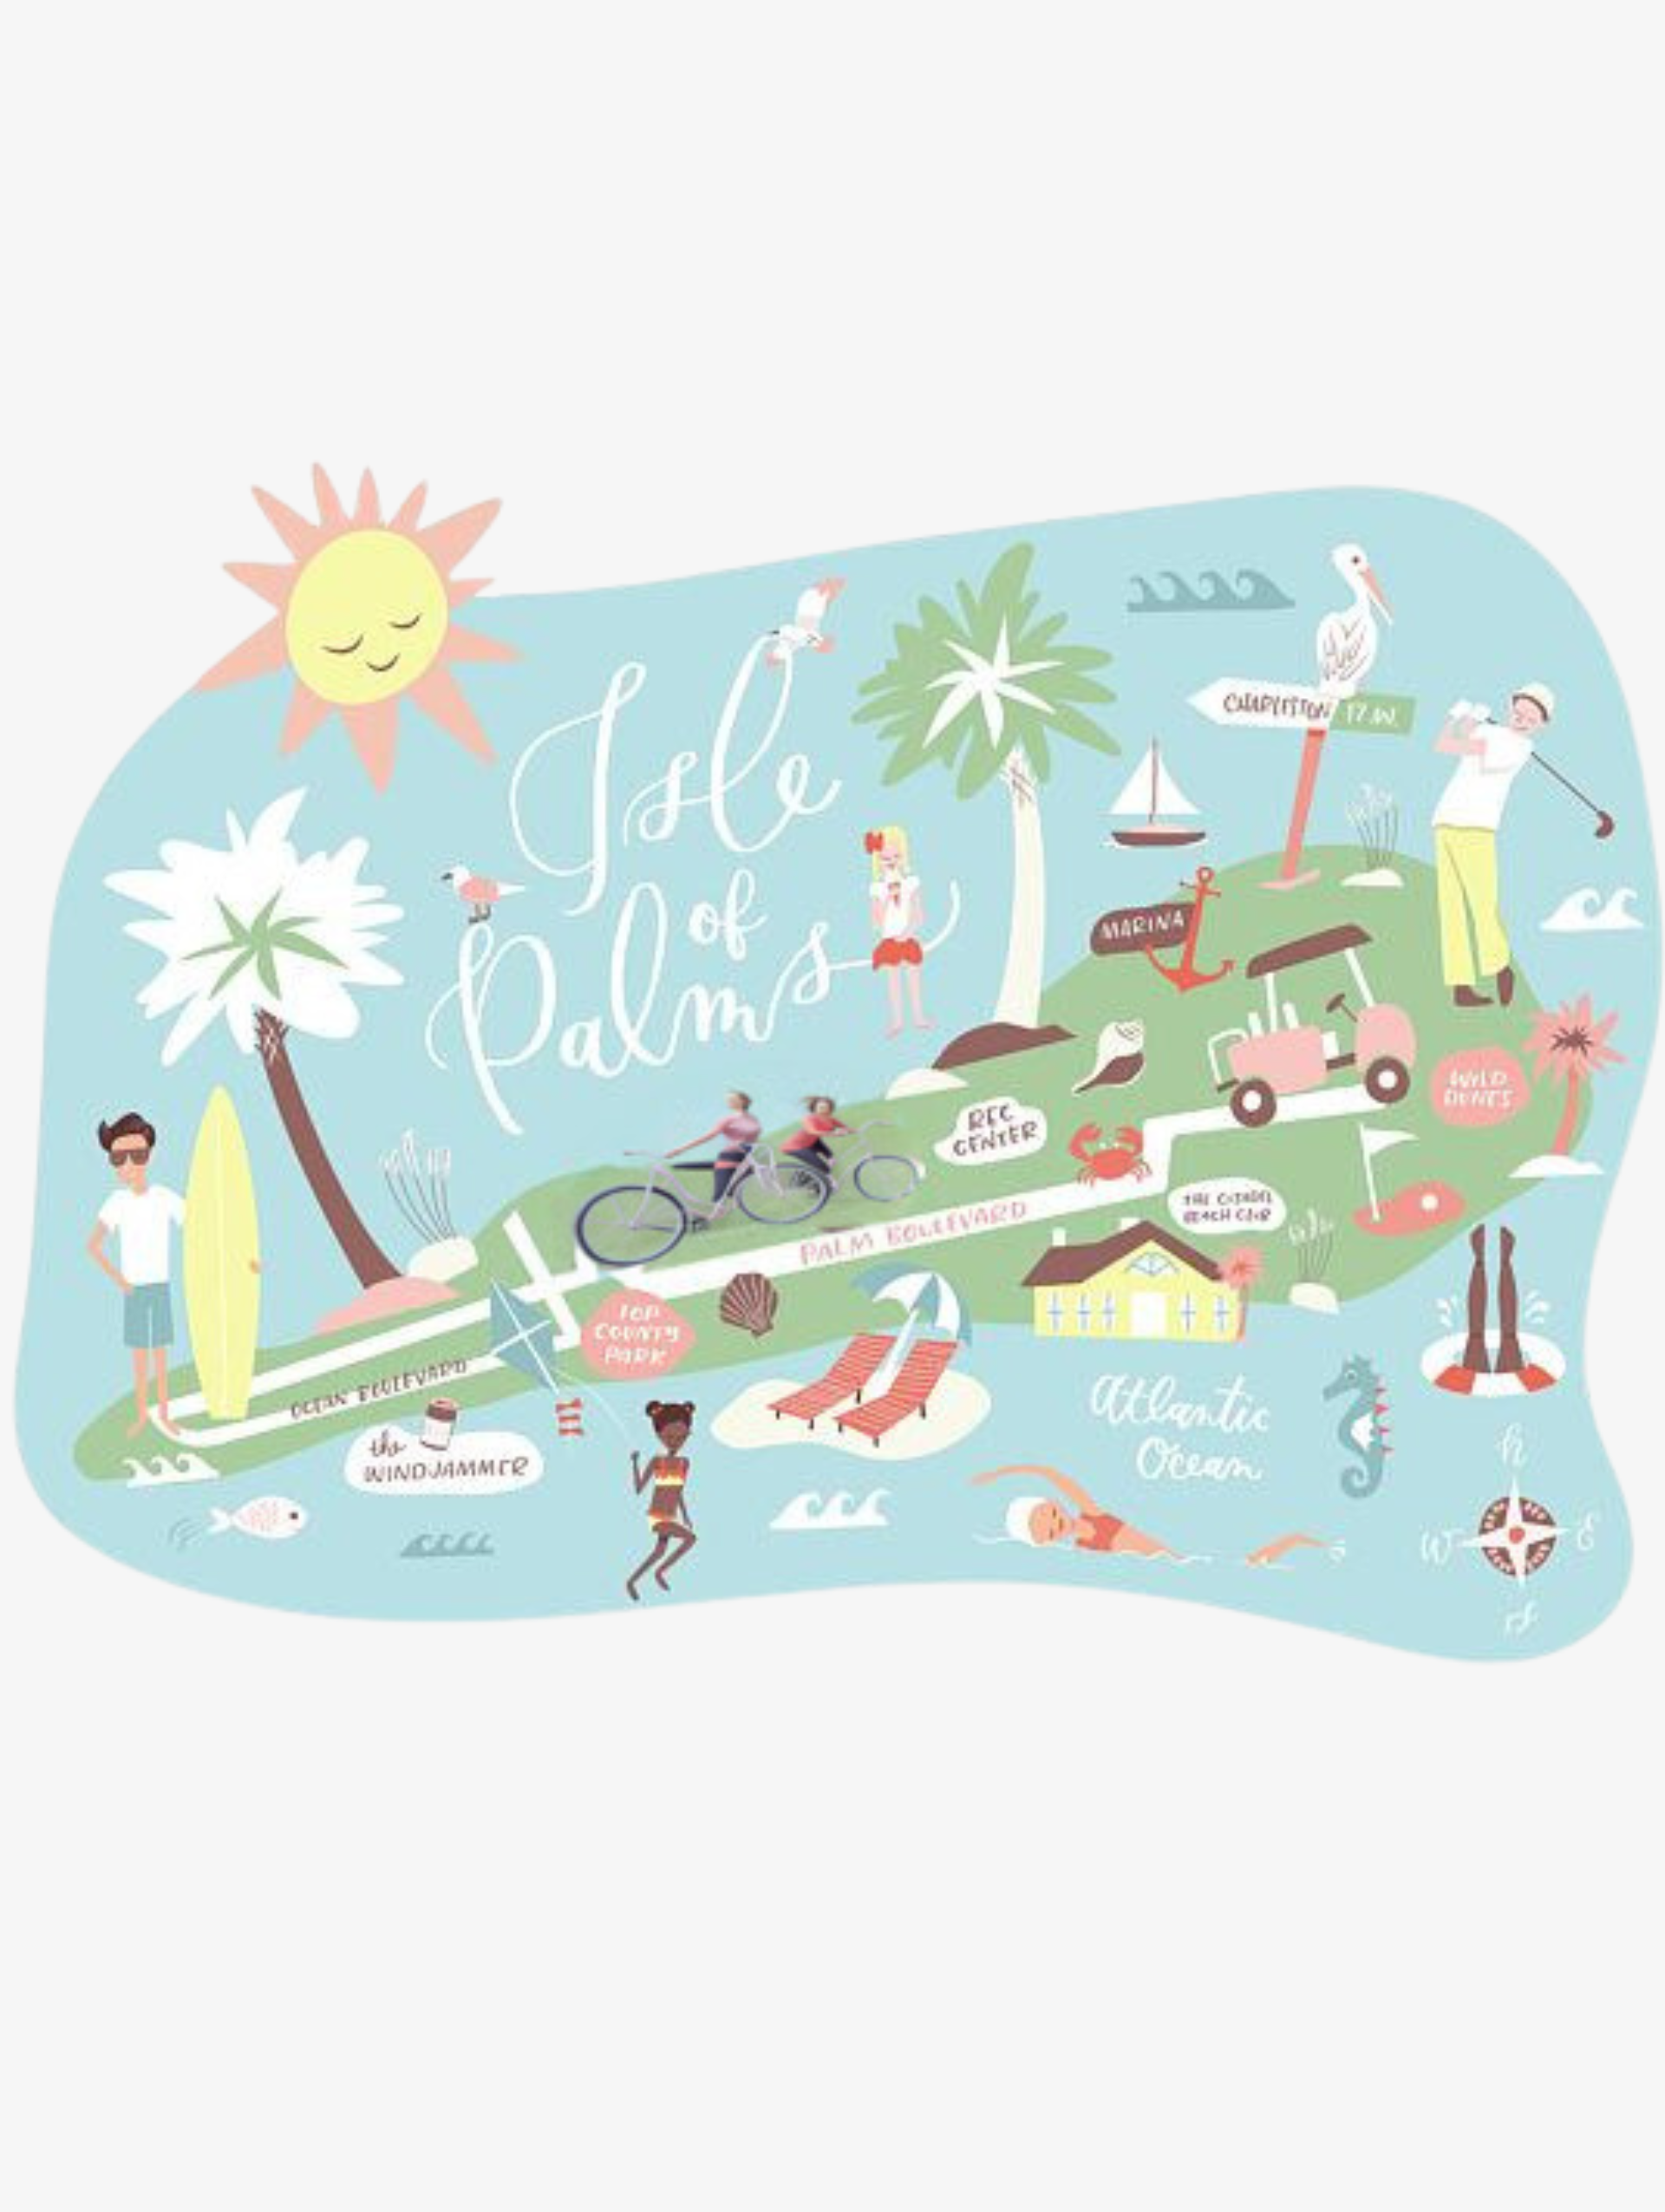 a map of isle of palms, SC